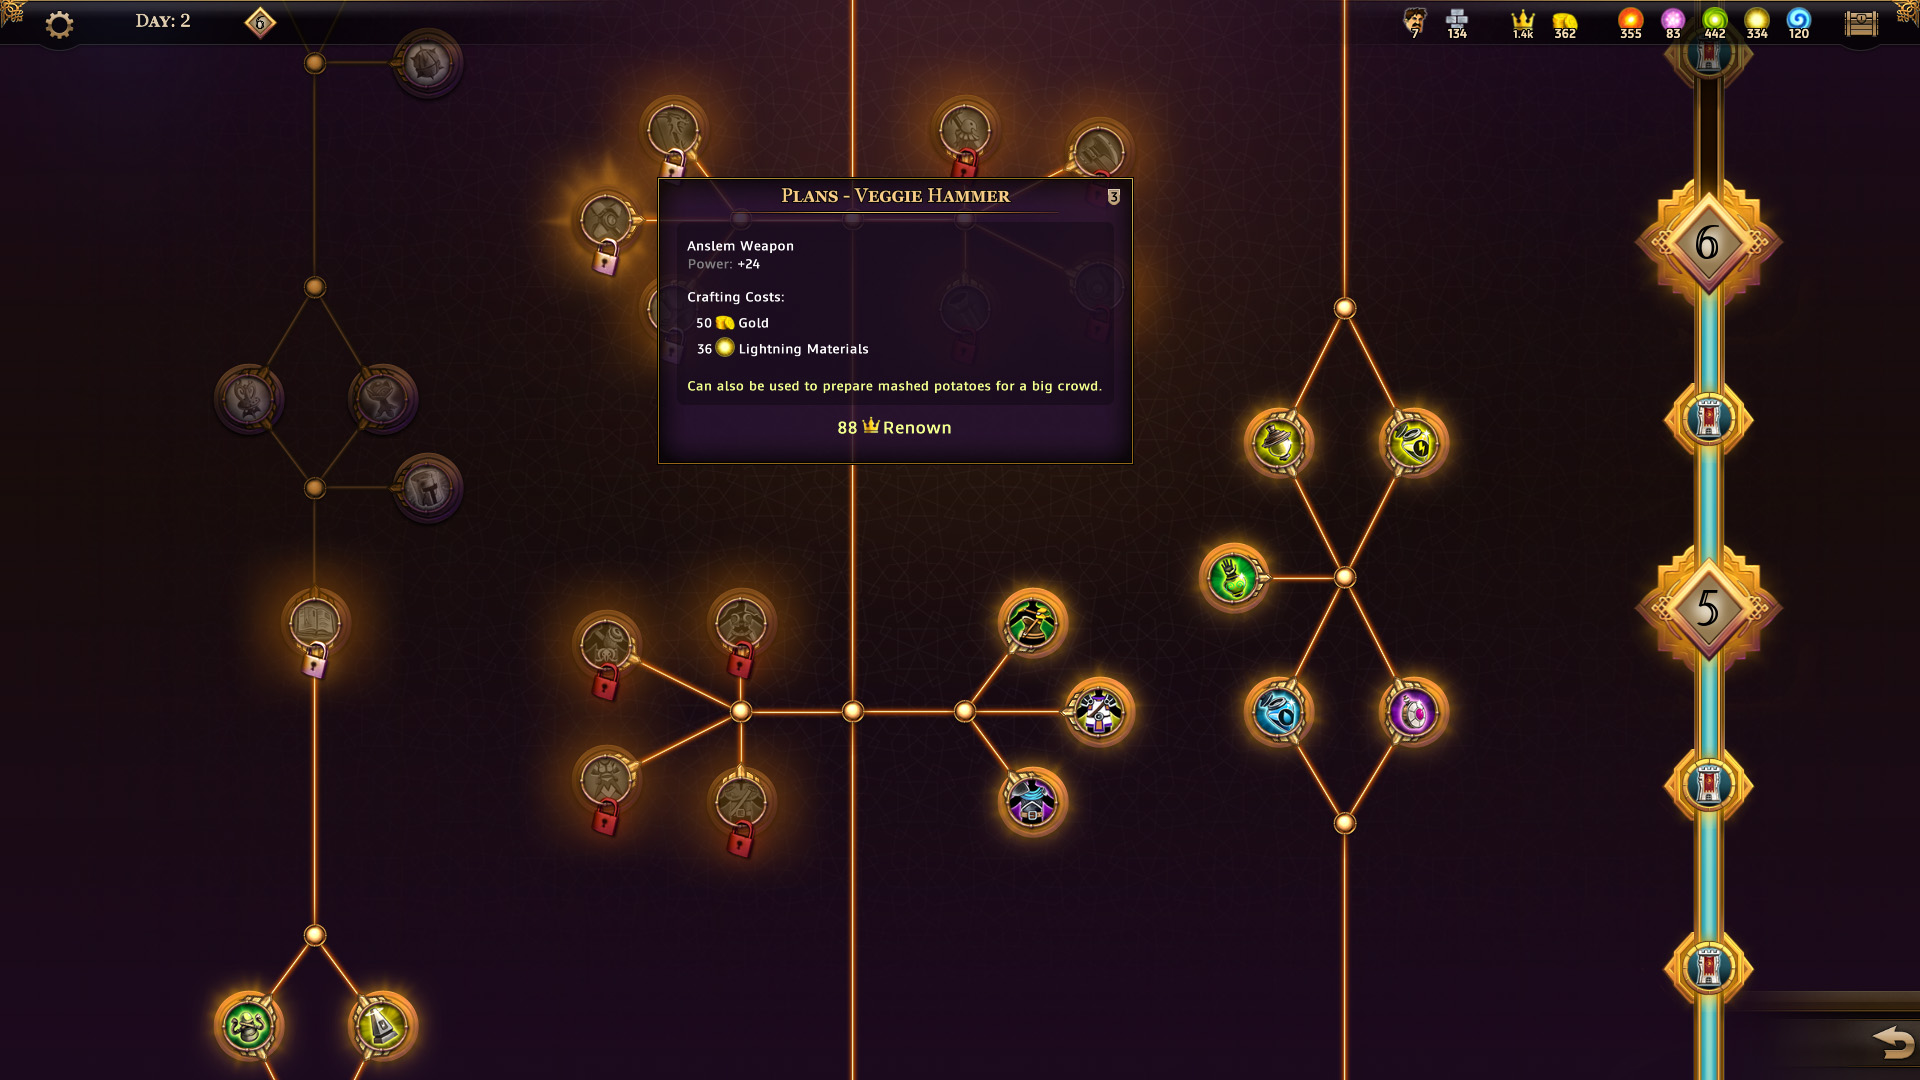 Steam :: Champions of Anteria :: Show us your skill tree! 